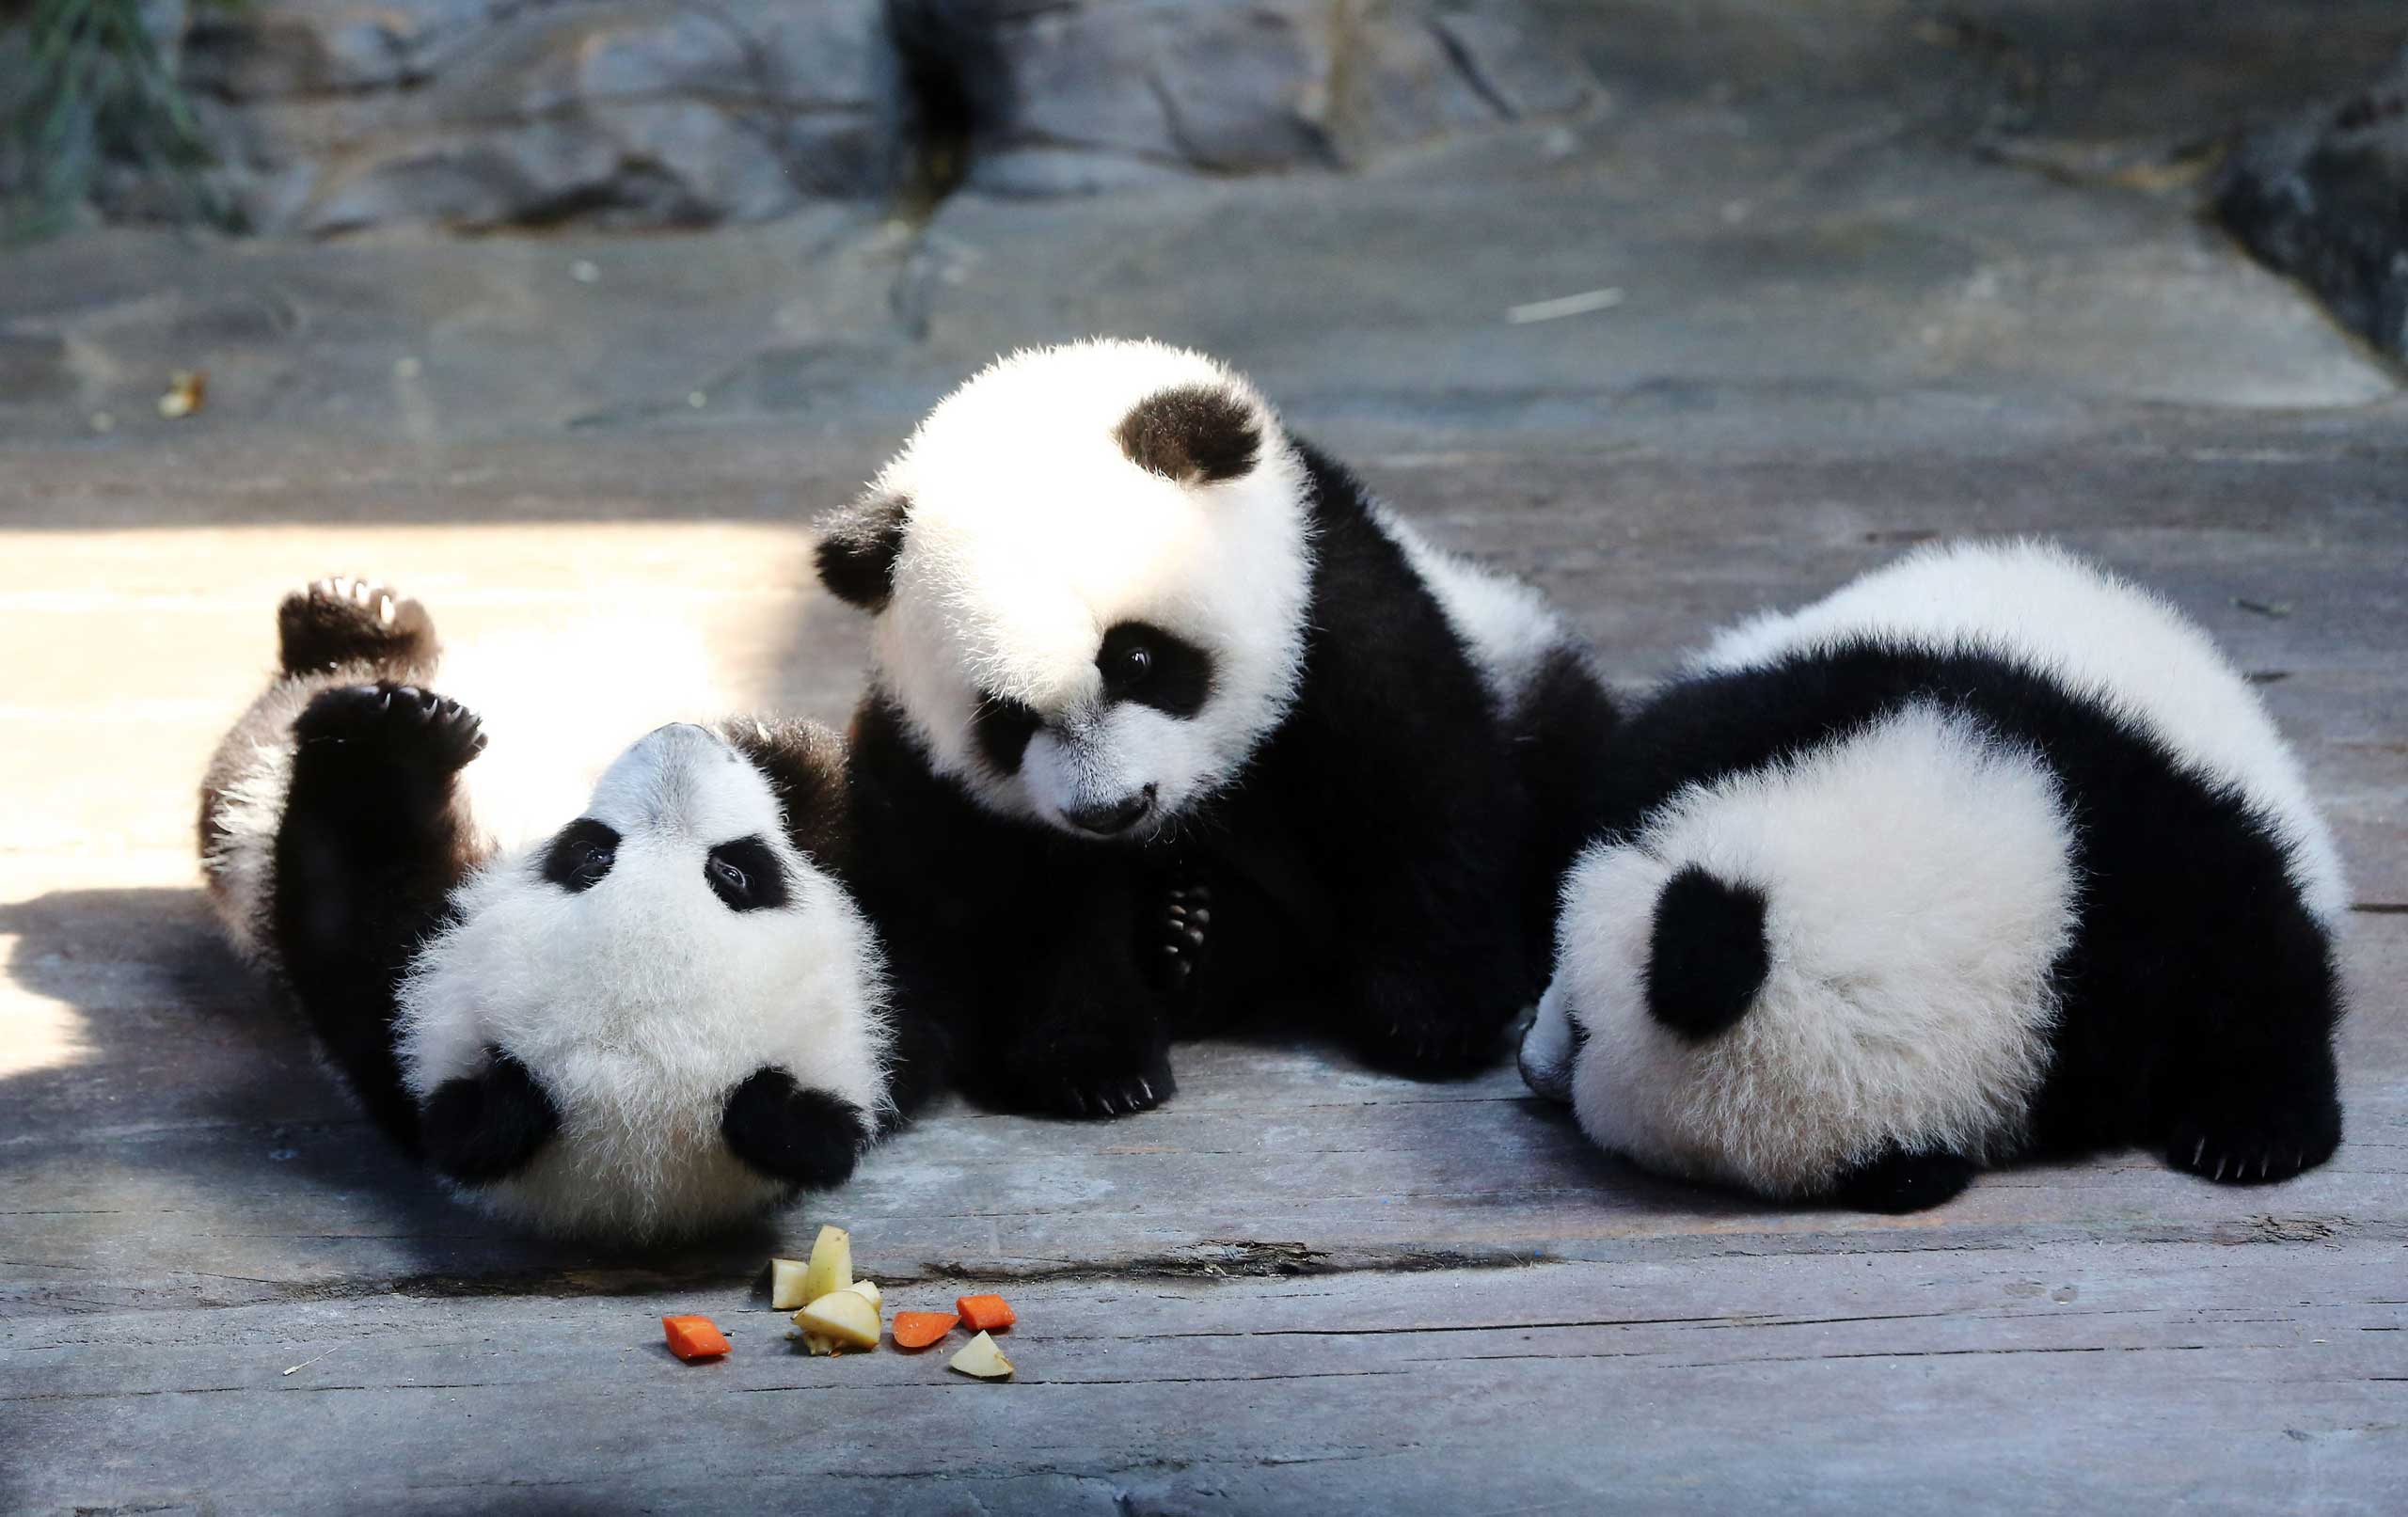 Dec. 9, 2014. The world's only live panda triplets play together at Chimelong Safari Park in Guangzhou, south China's Guangdong province.